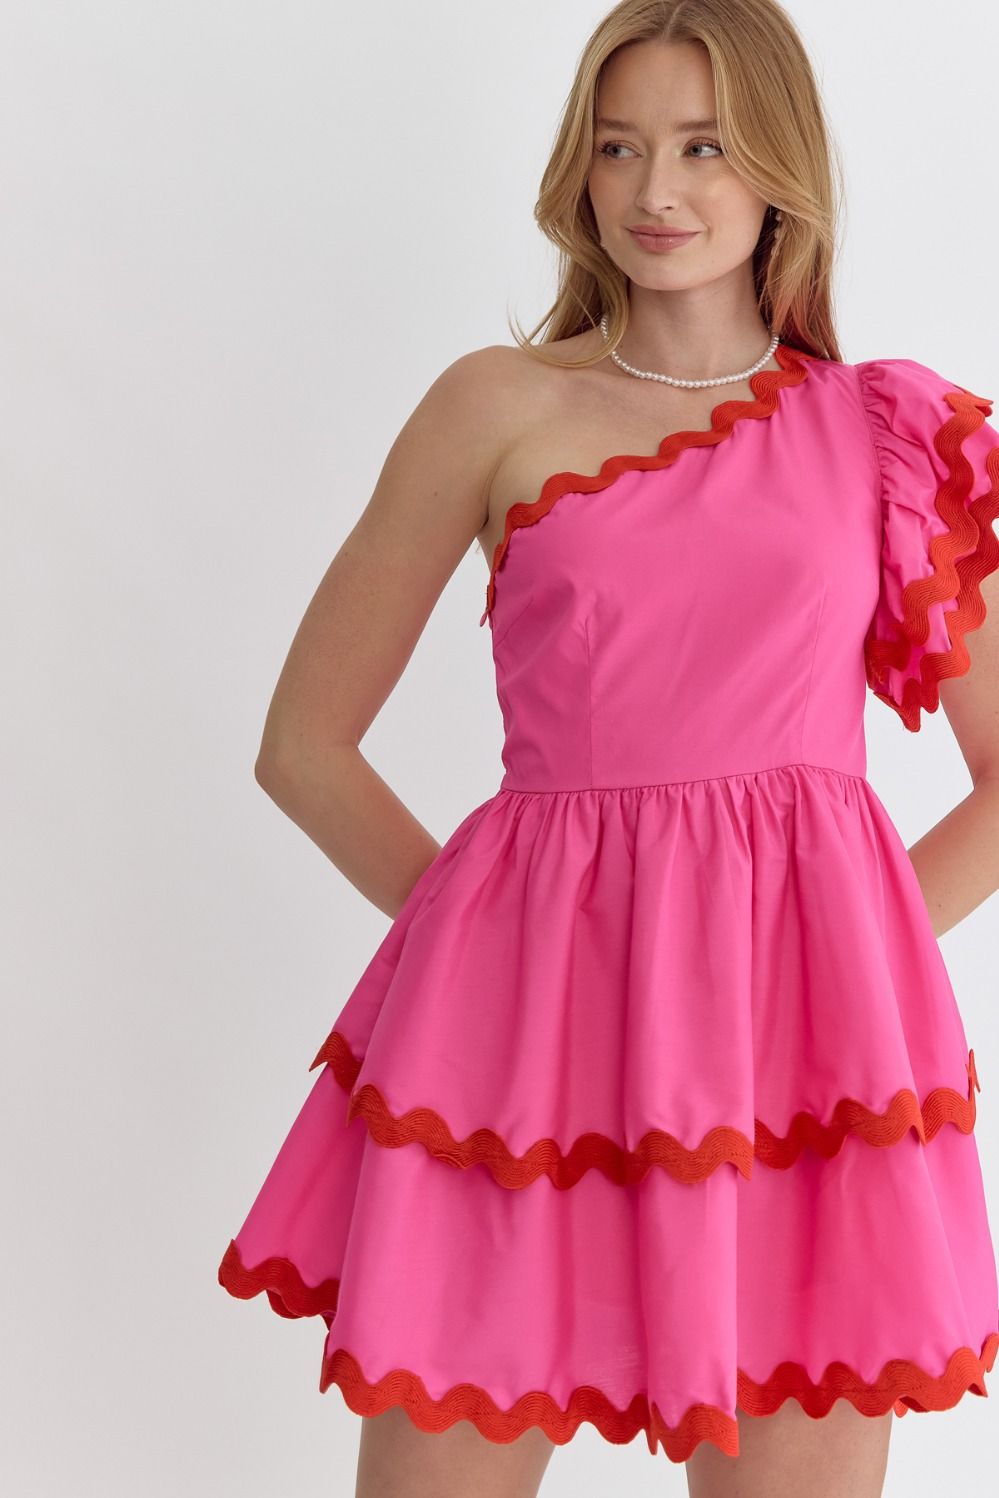 Entro Hot pink one shoulder dress with red scalloped piping trim